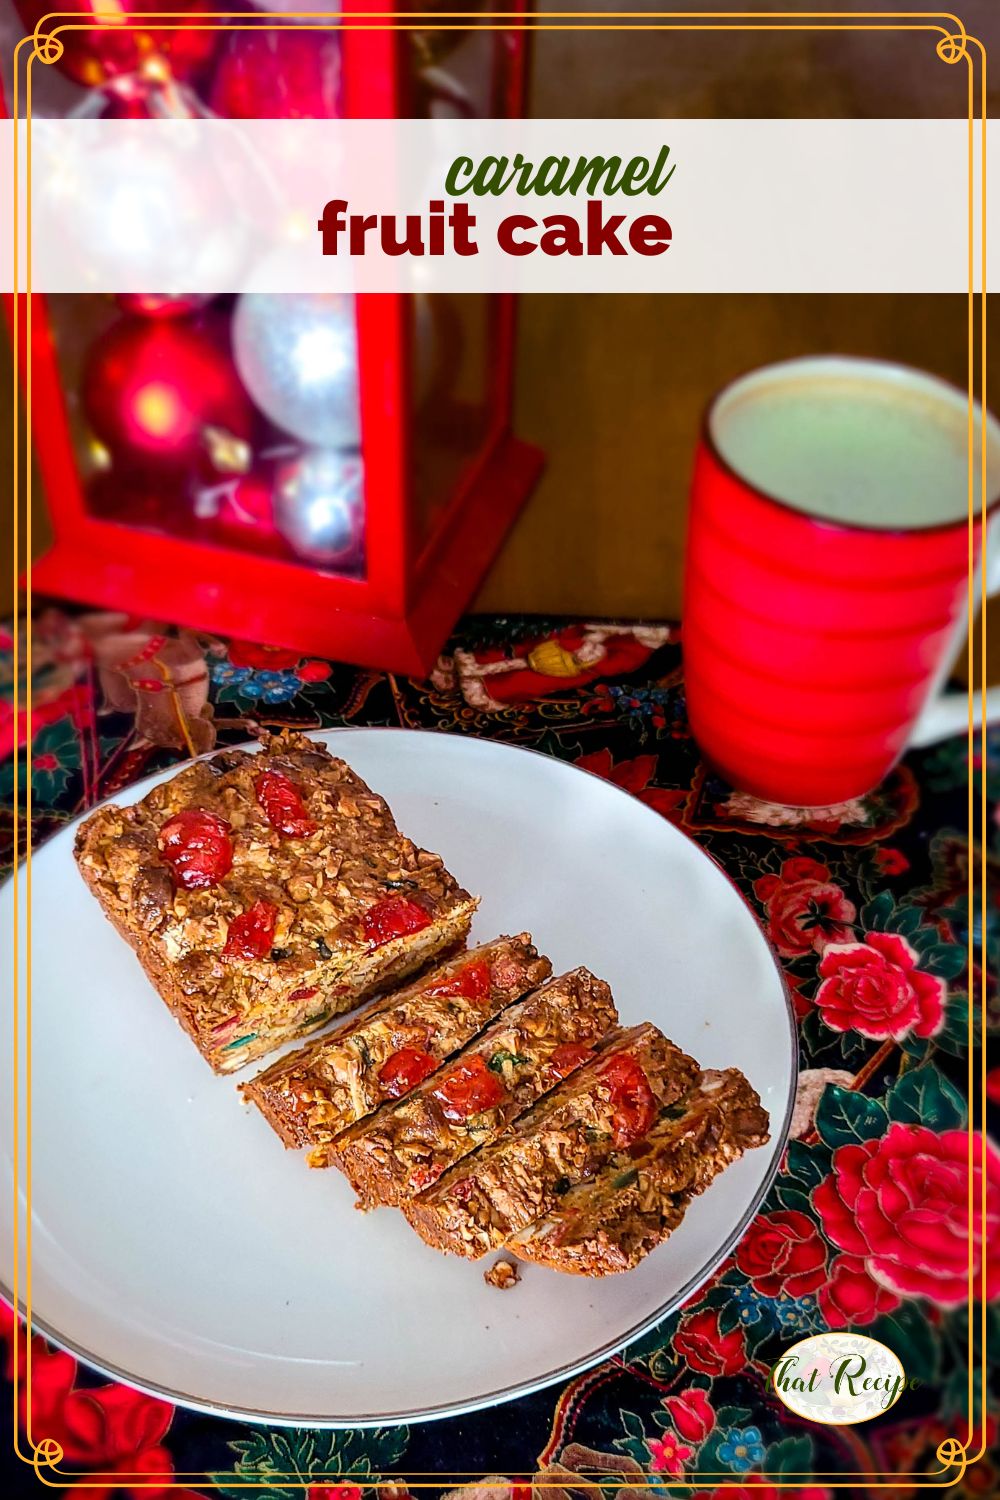 Sliced fruit cake on a plate with text overlay "caramel fruit cake"